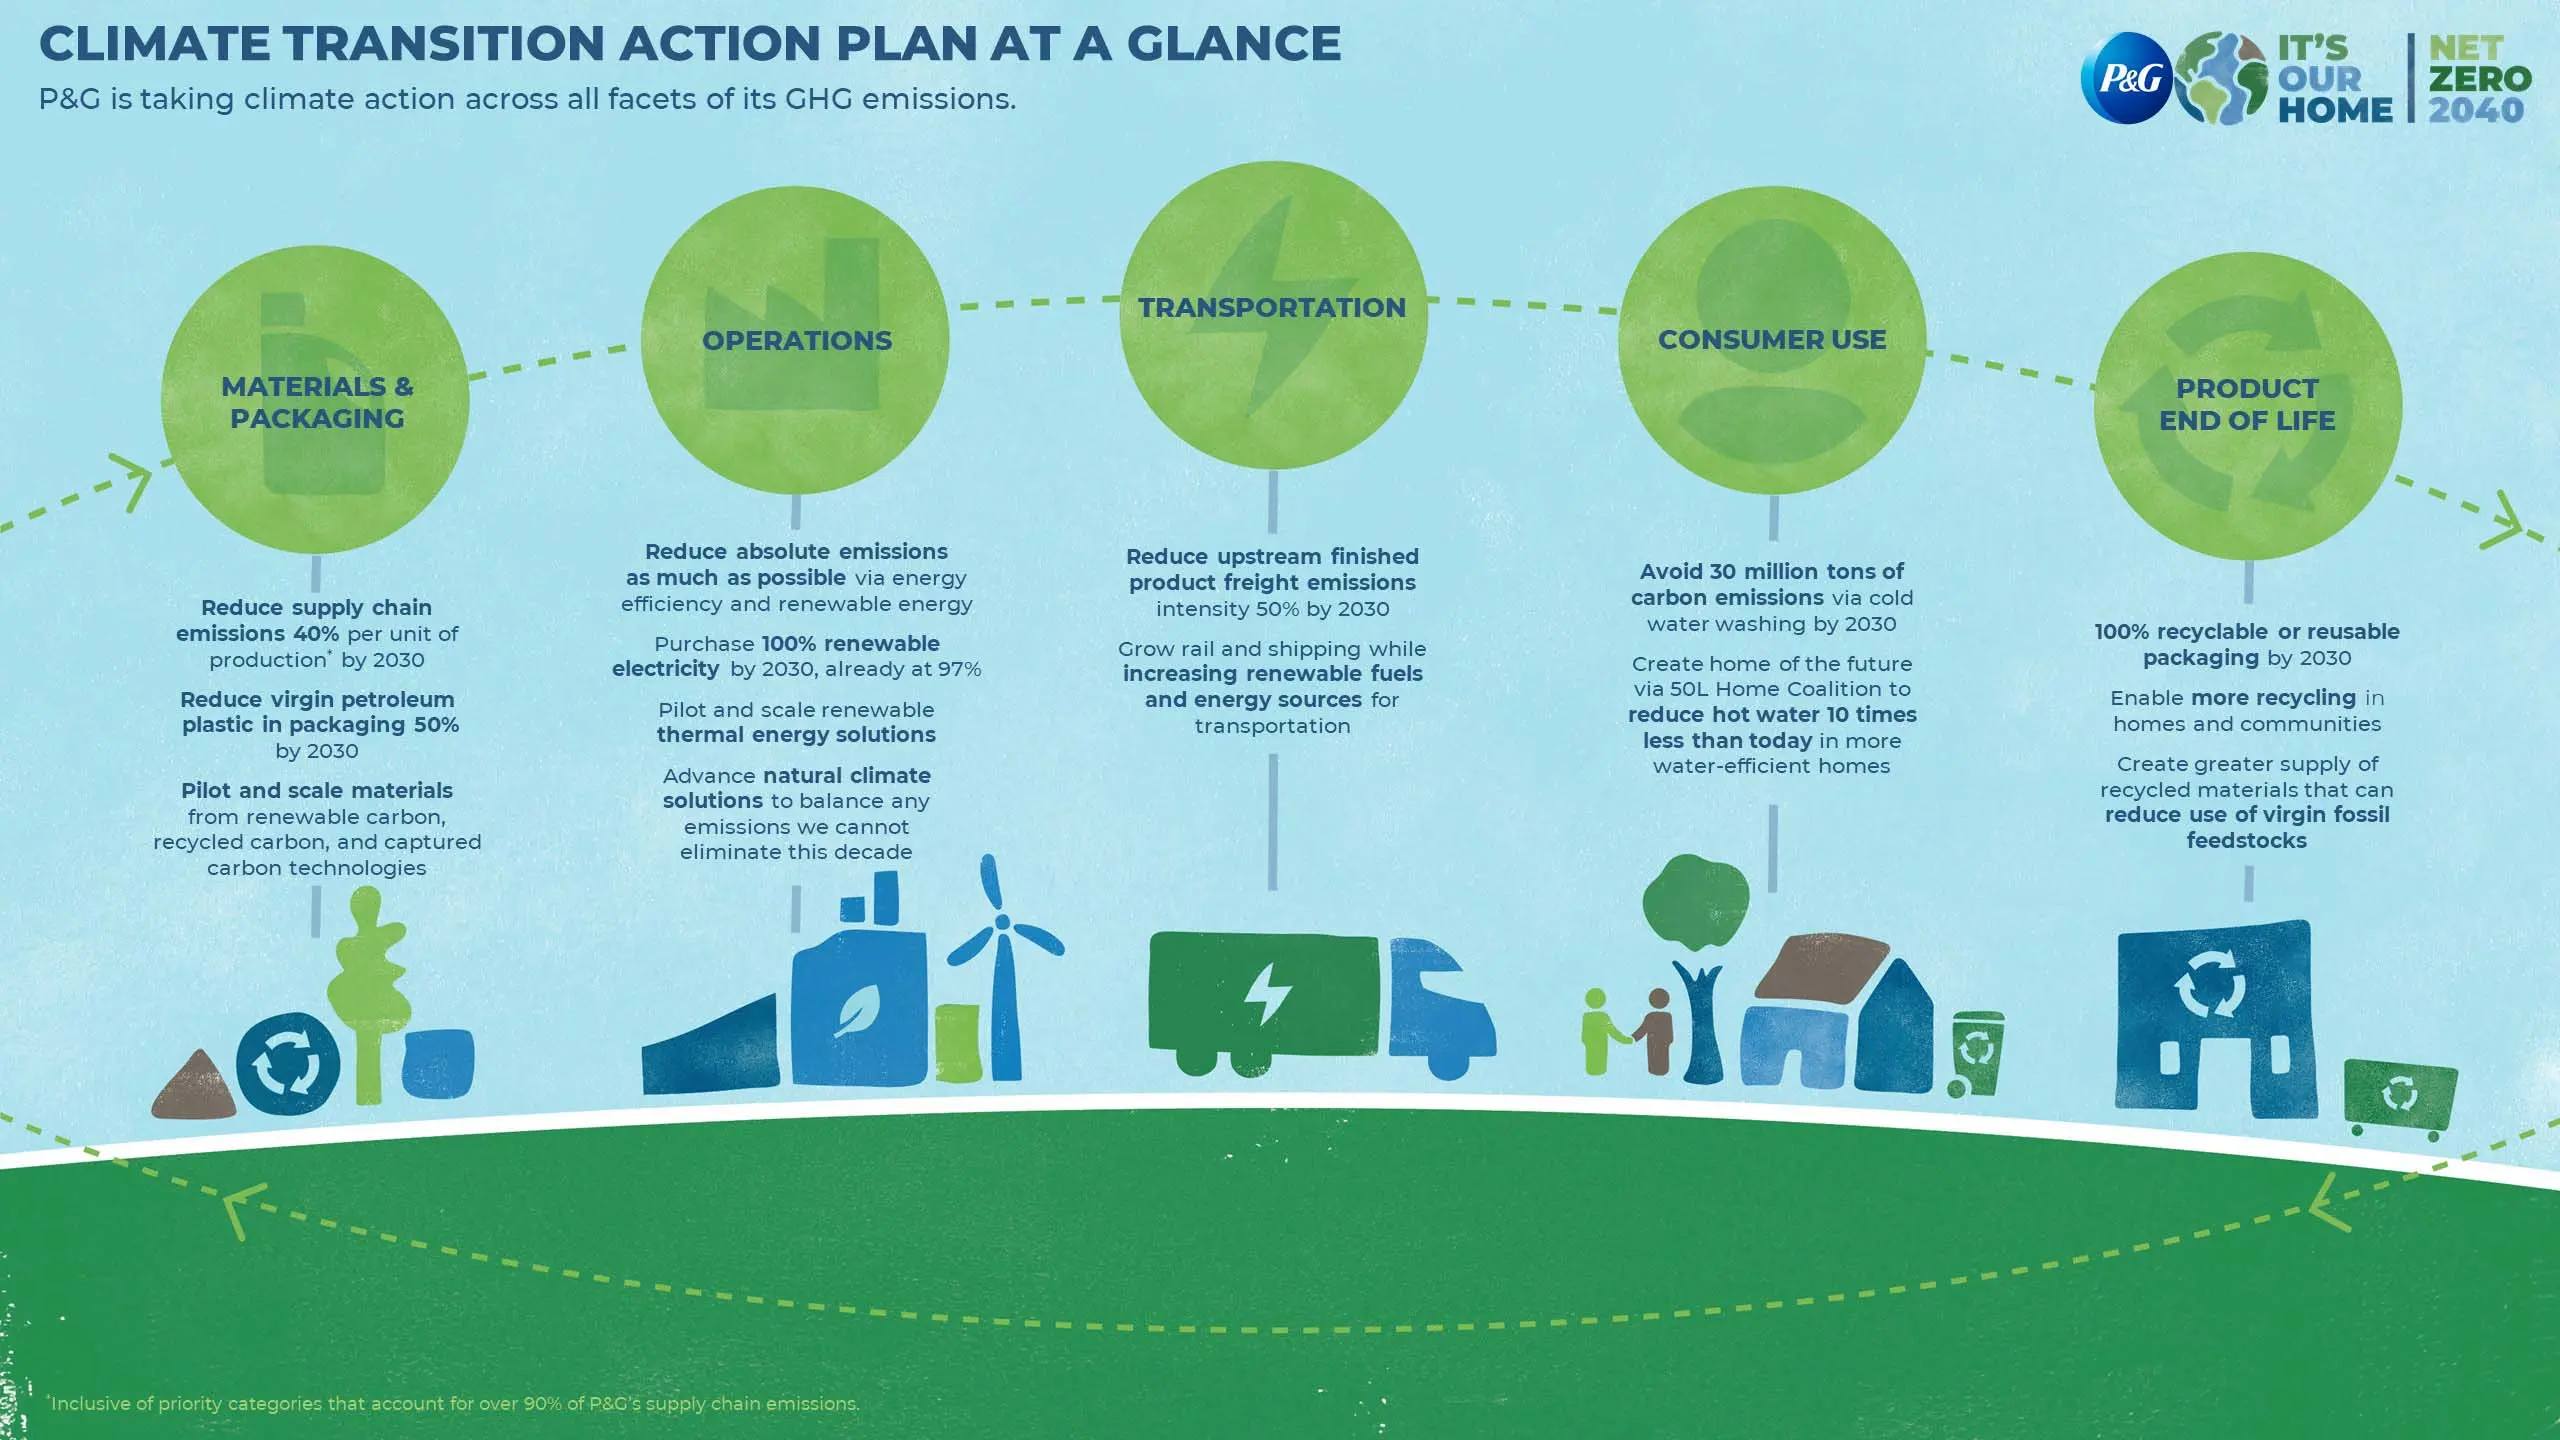 An infographic that demonstrates how P&G is taking climate action across all stages of its products’ life cycle, from materials & packaging to product end of life.